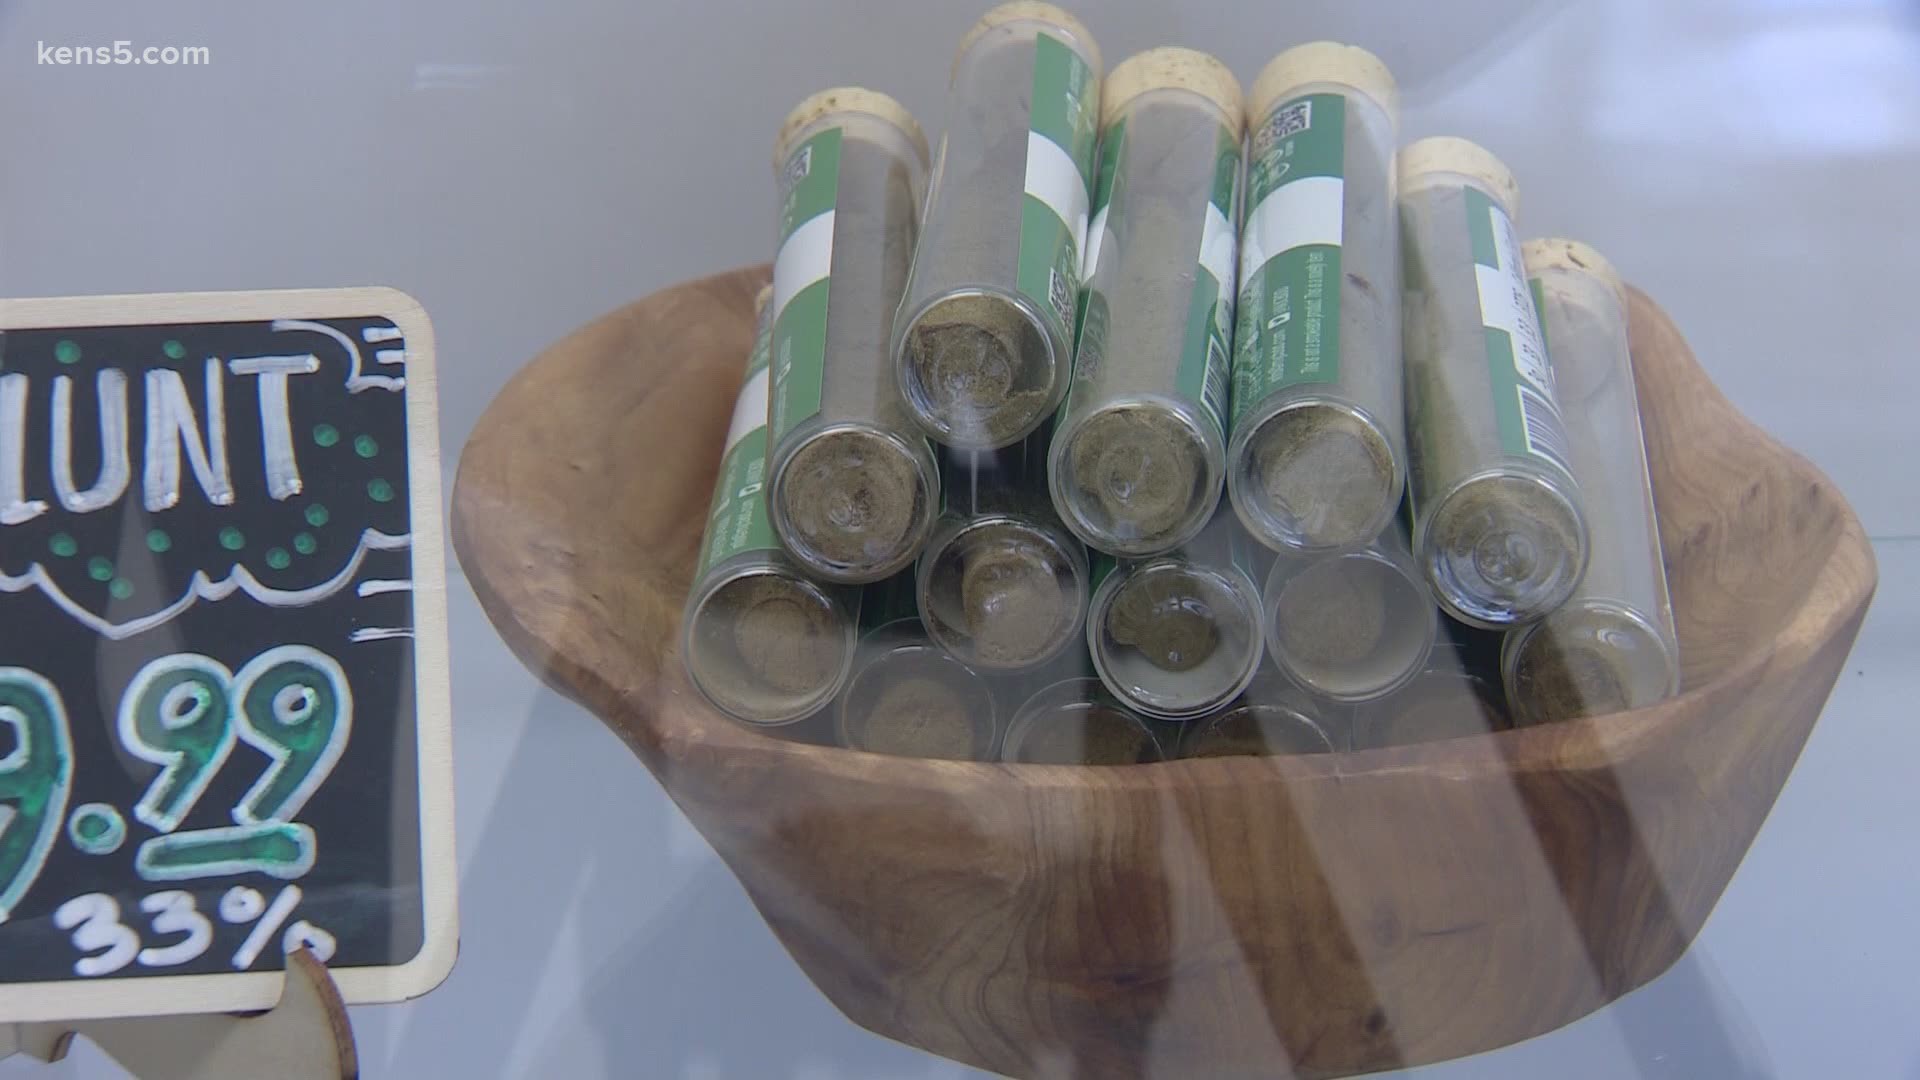 Come August 2, businesses in the Lone Star State will only be permitted to sell consumable versions of hemp products. Store owners say the impact goes beyond them.